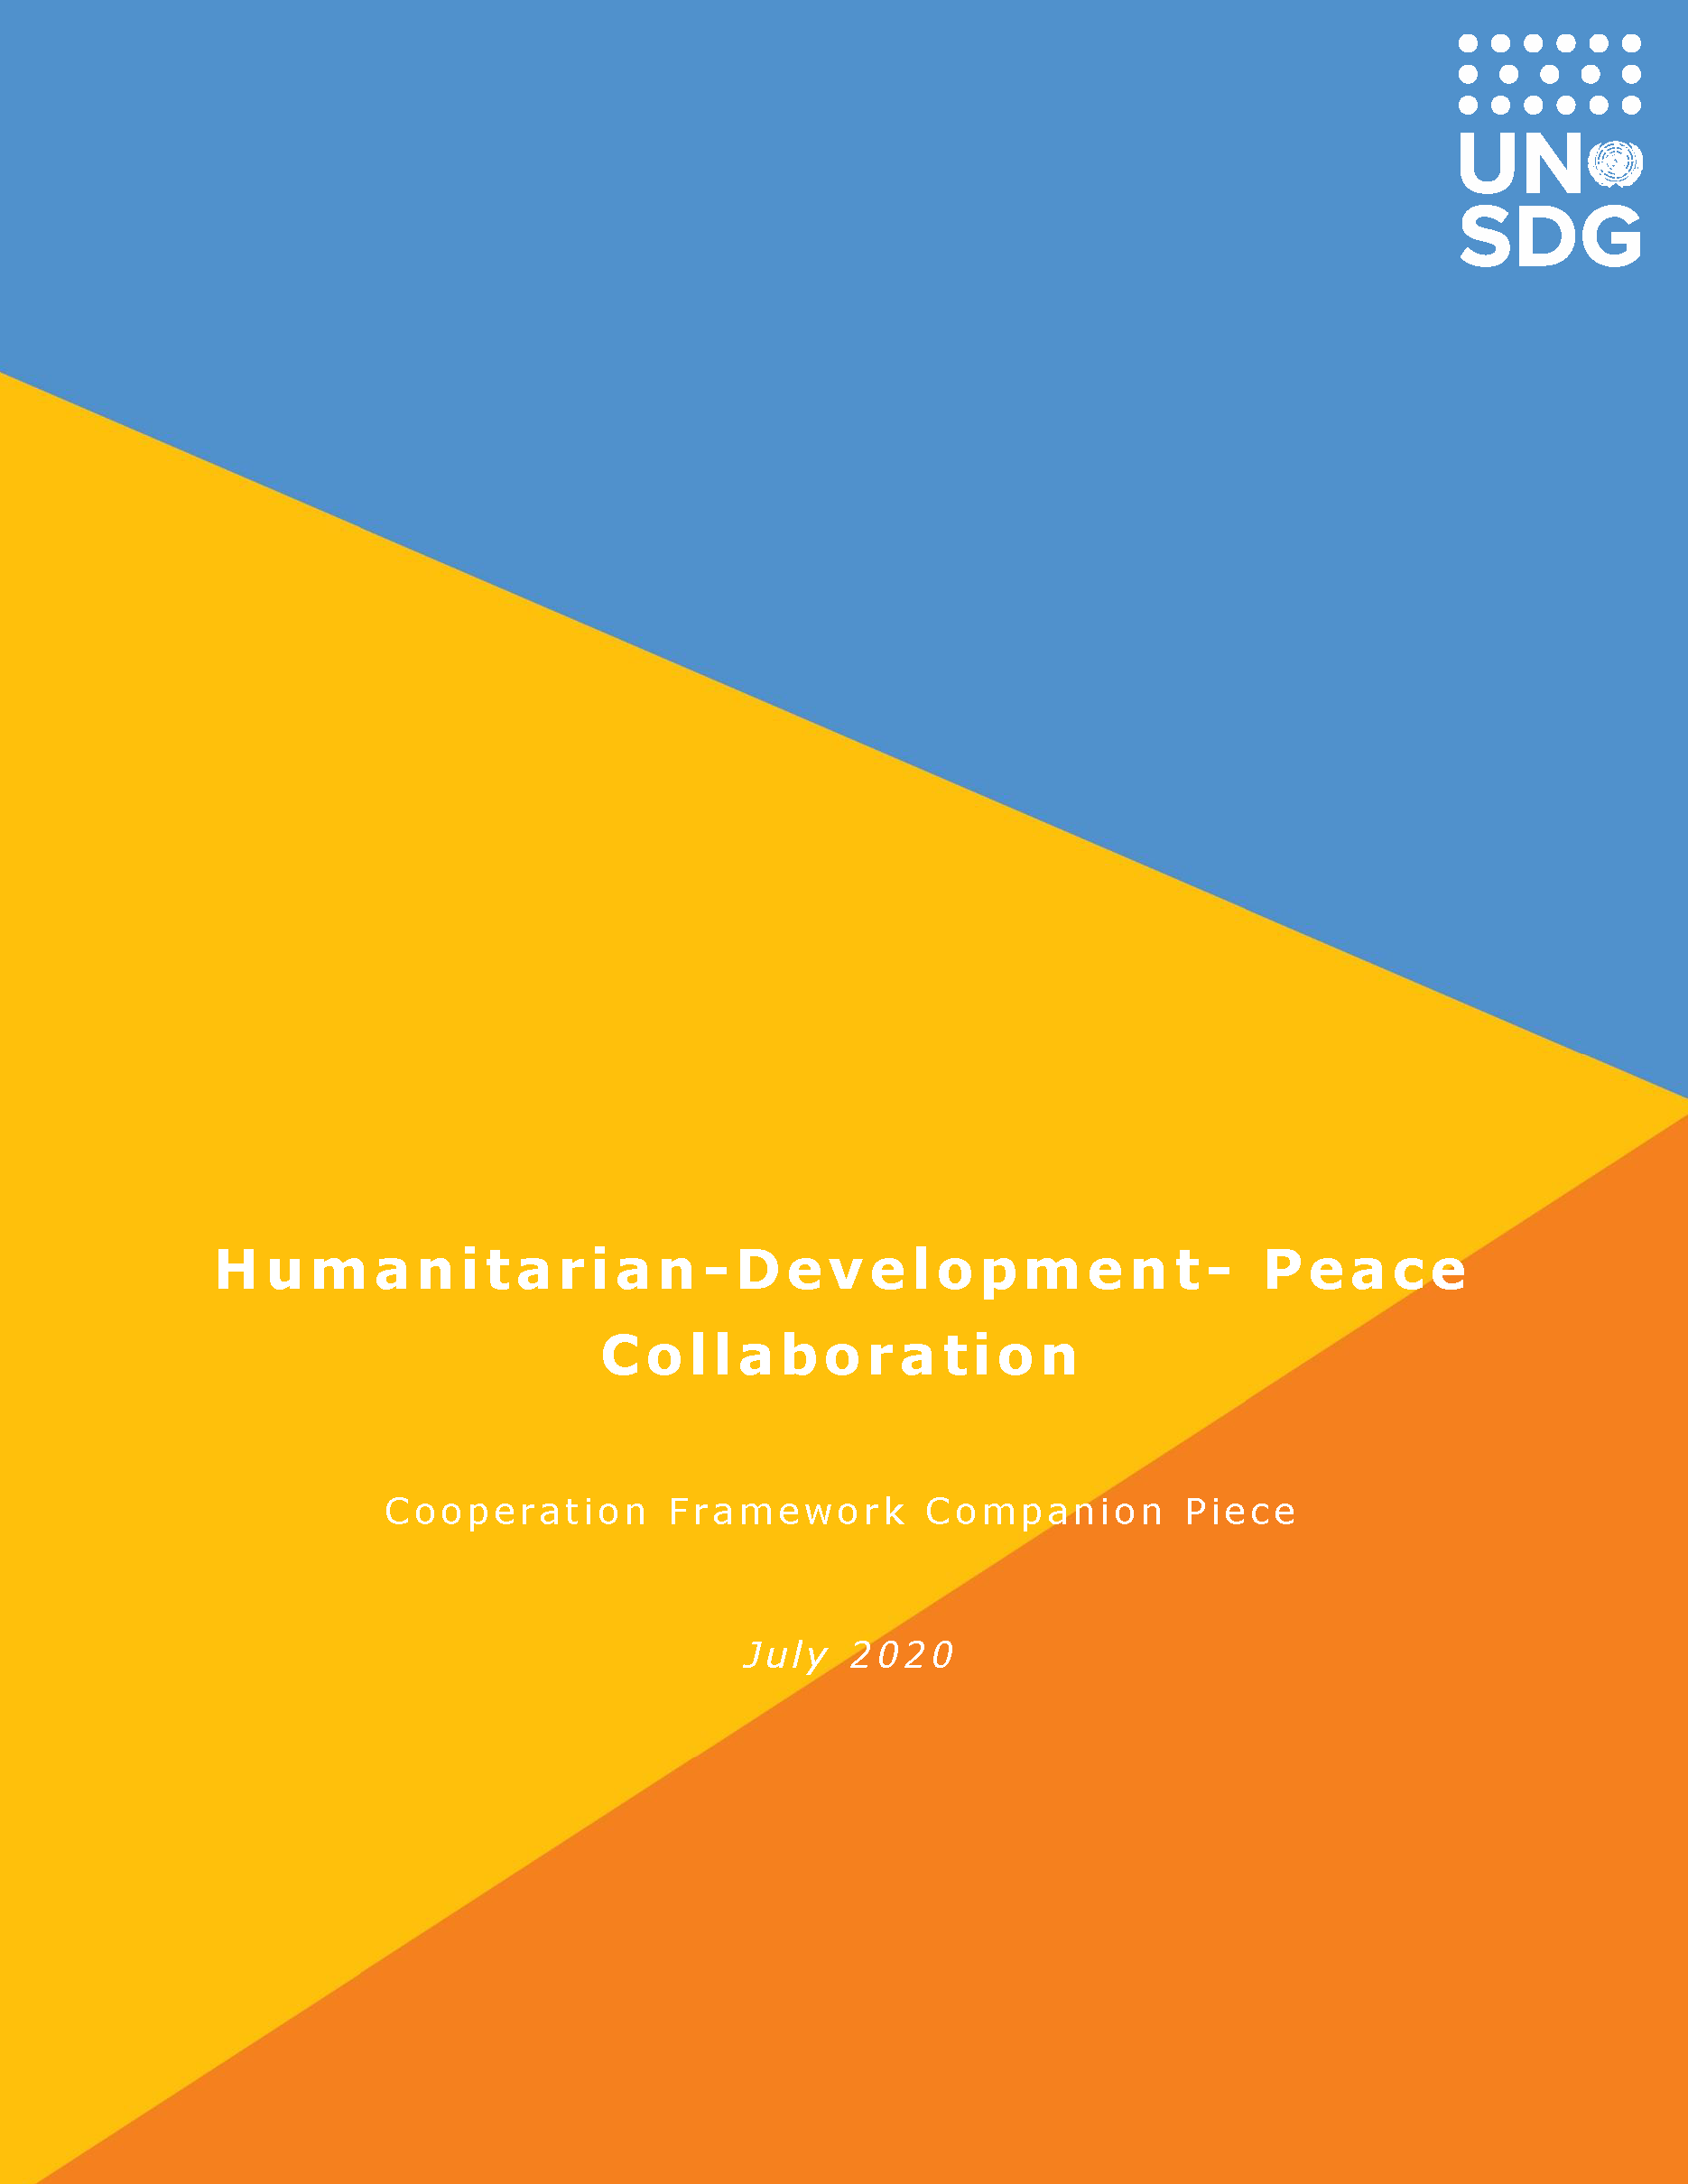 Cover page for Humanitarian-Development-Peace Collaboration" Cooperation Framework Companion Piece